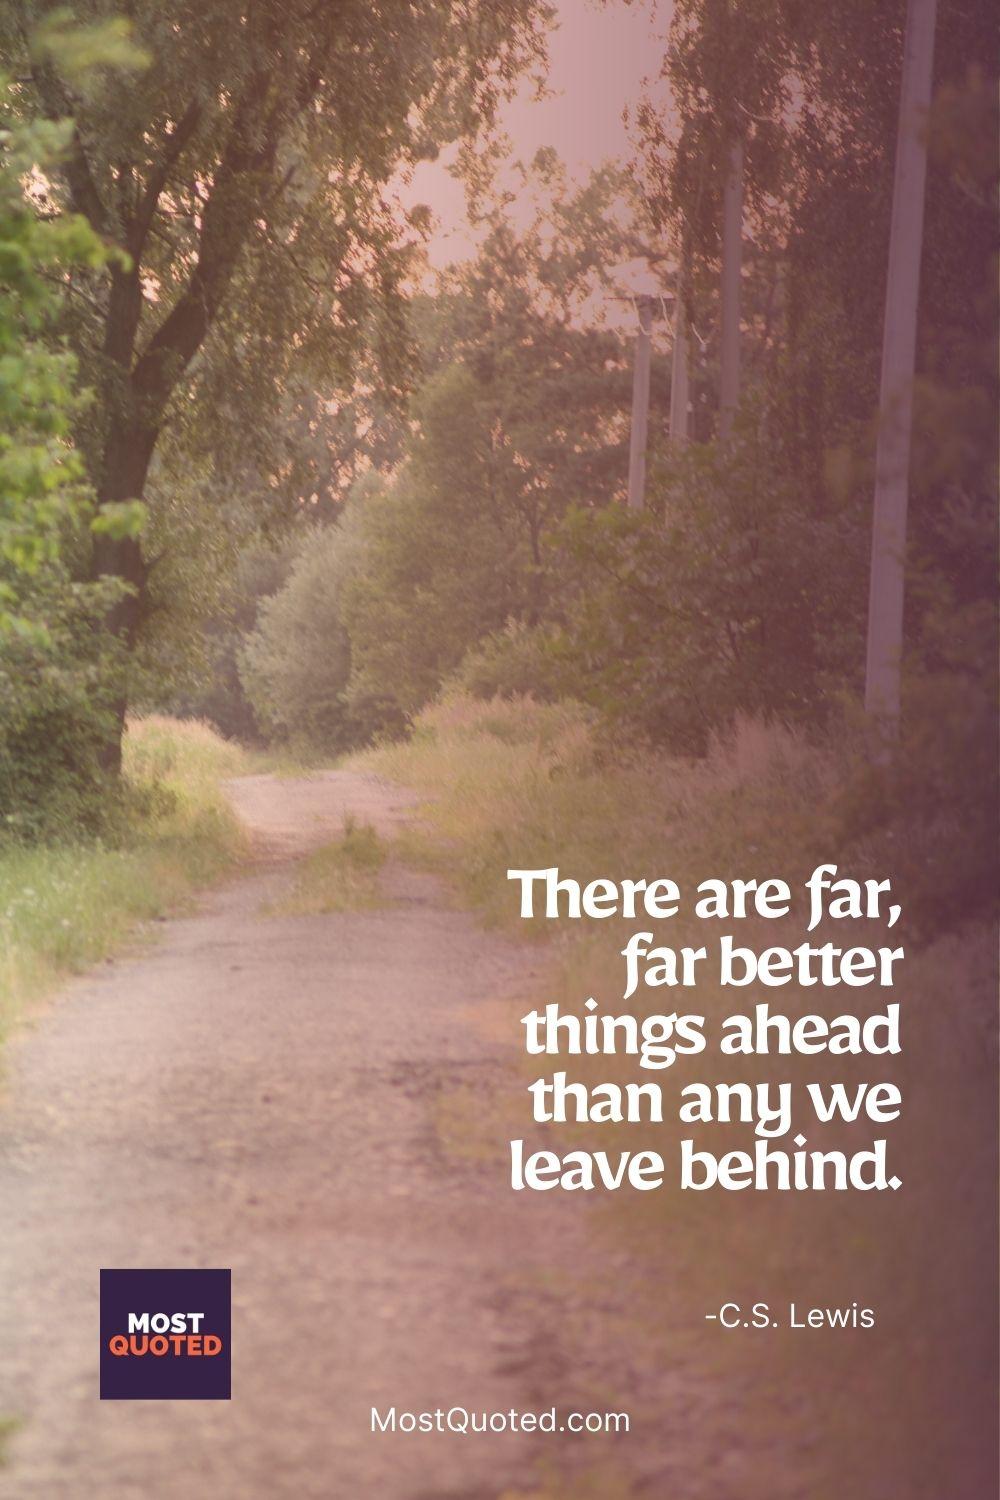 There are far, far better things ahead than any we leave behind. - C.S. Lewis